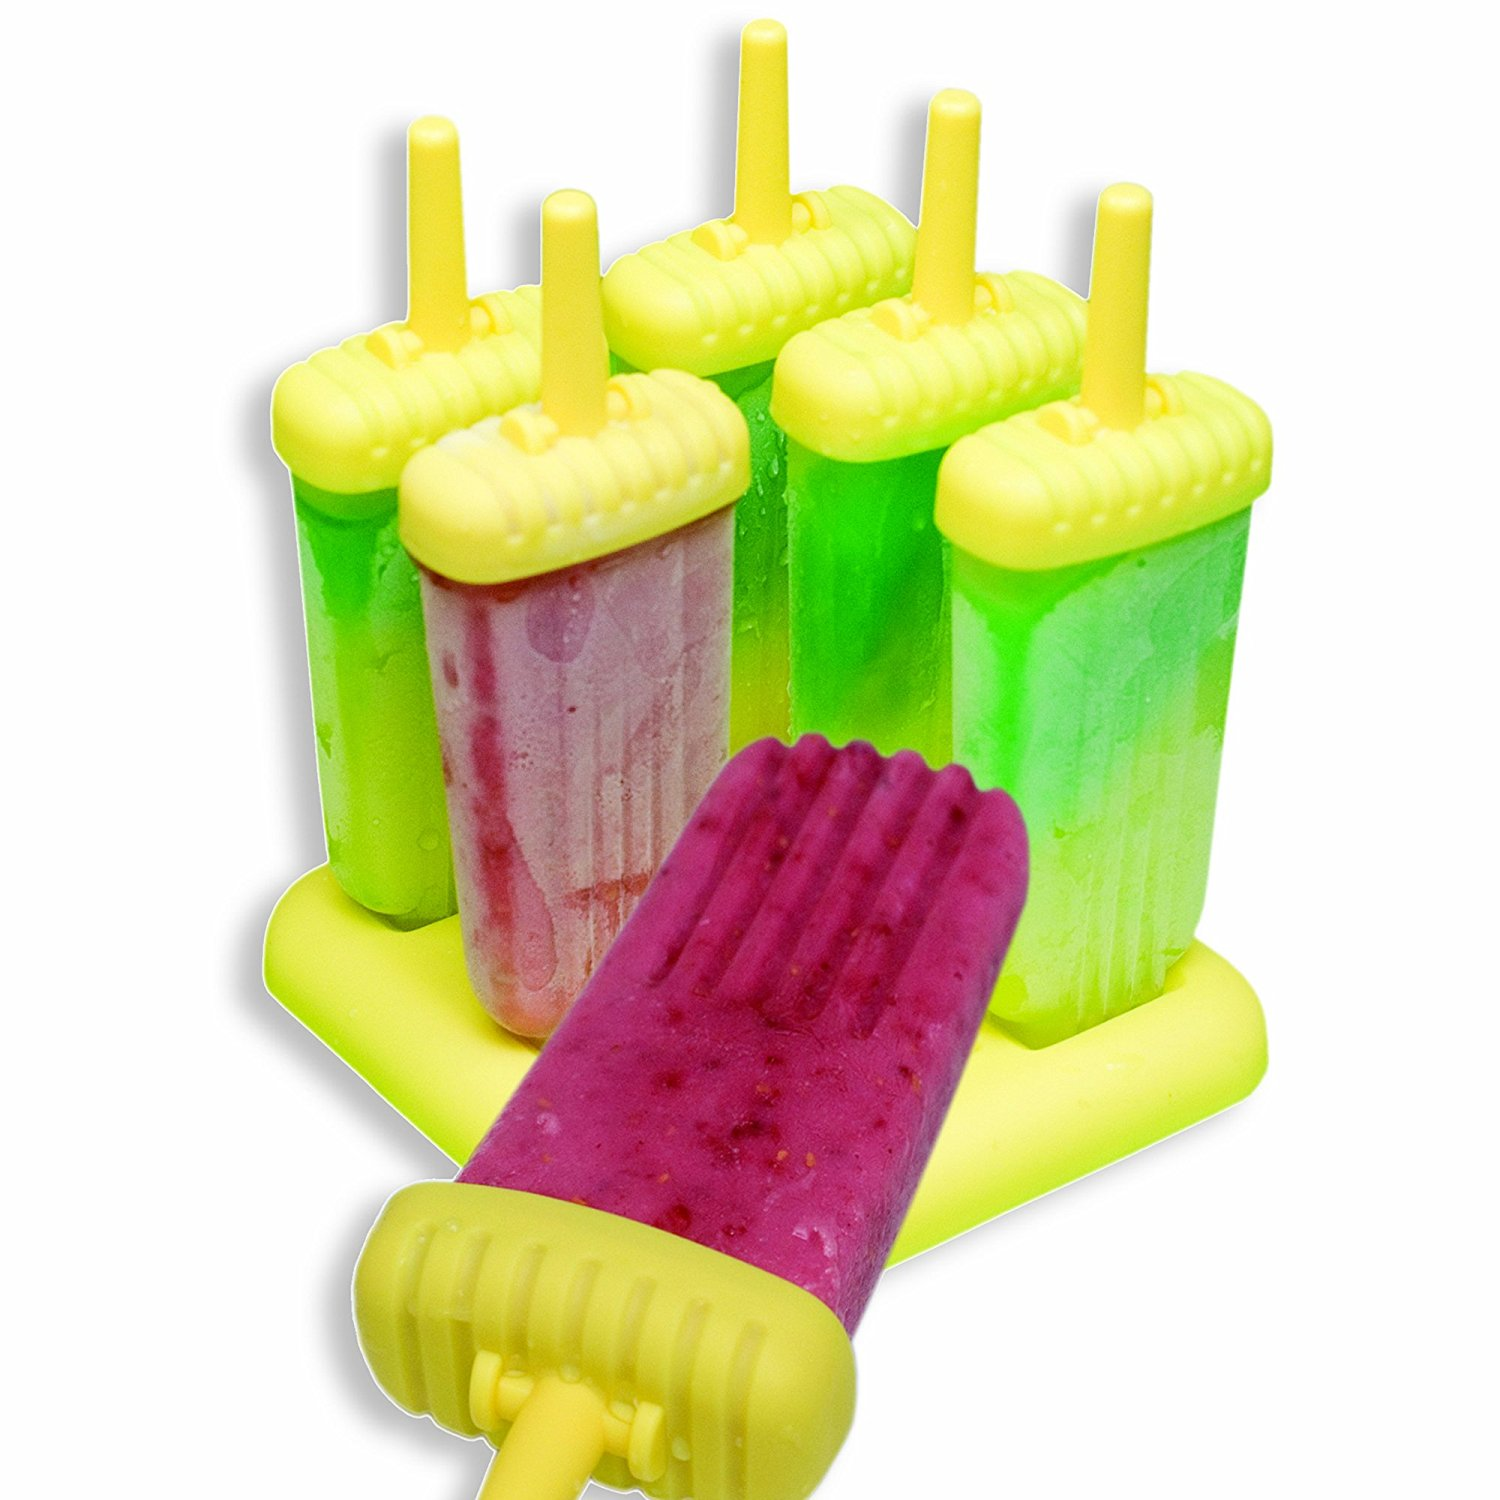 Tovolo Groovy Ice Pop Molds Only $3.12 on Amazon! (Add-On Item)